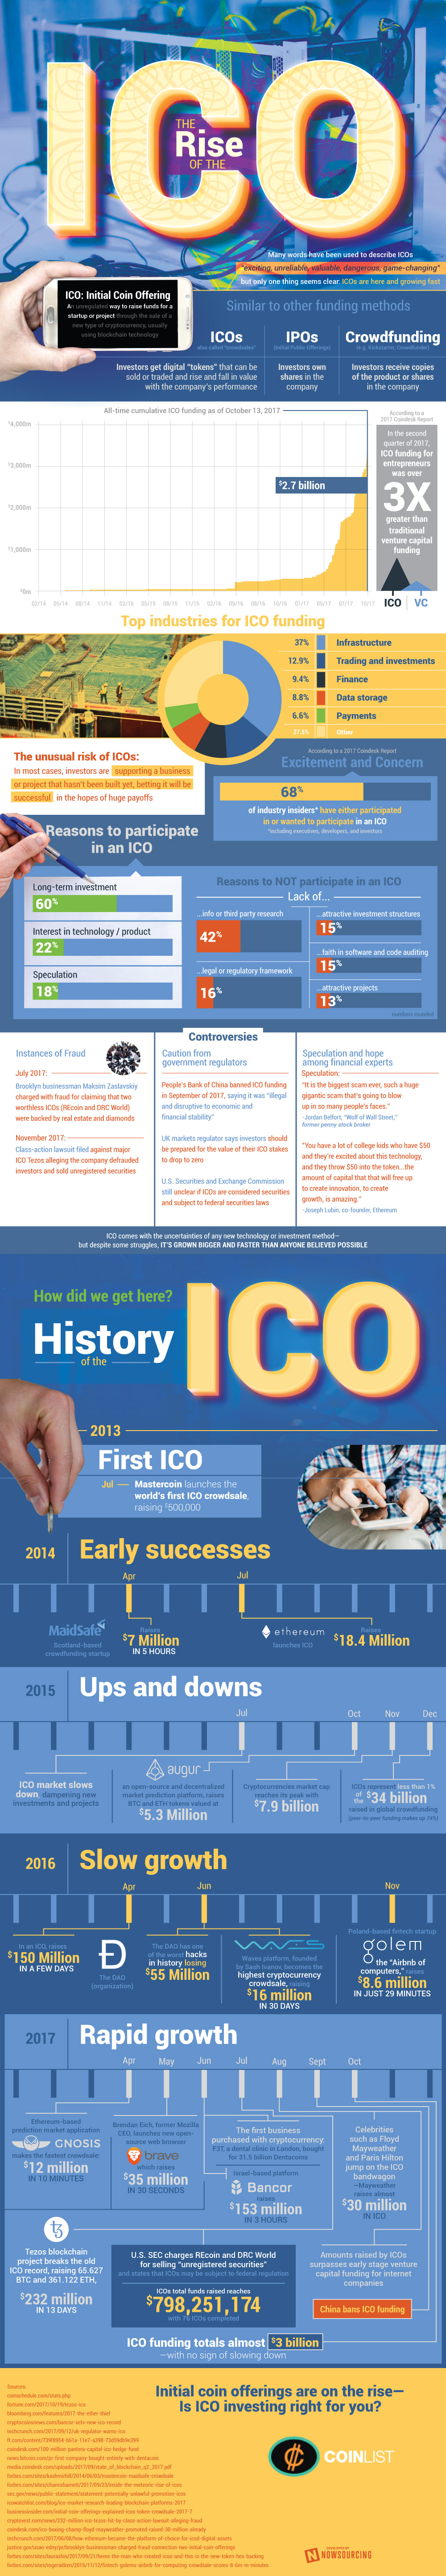 The Rise of the ICO